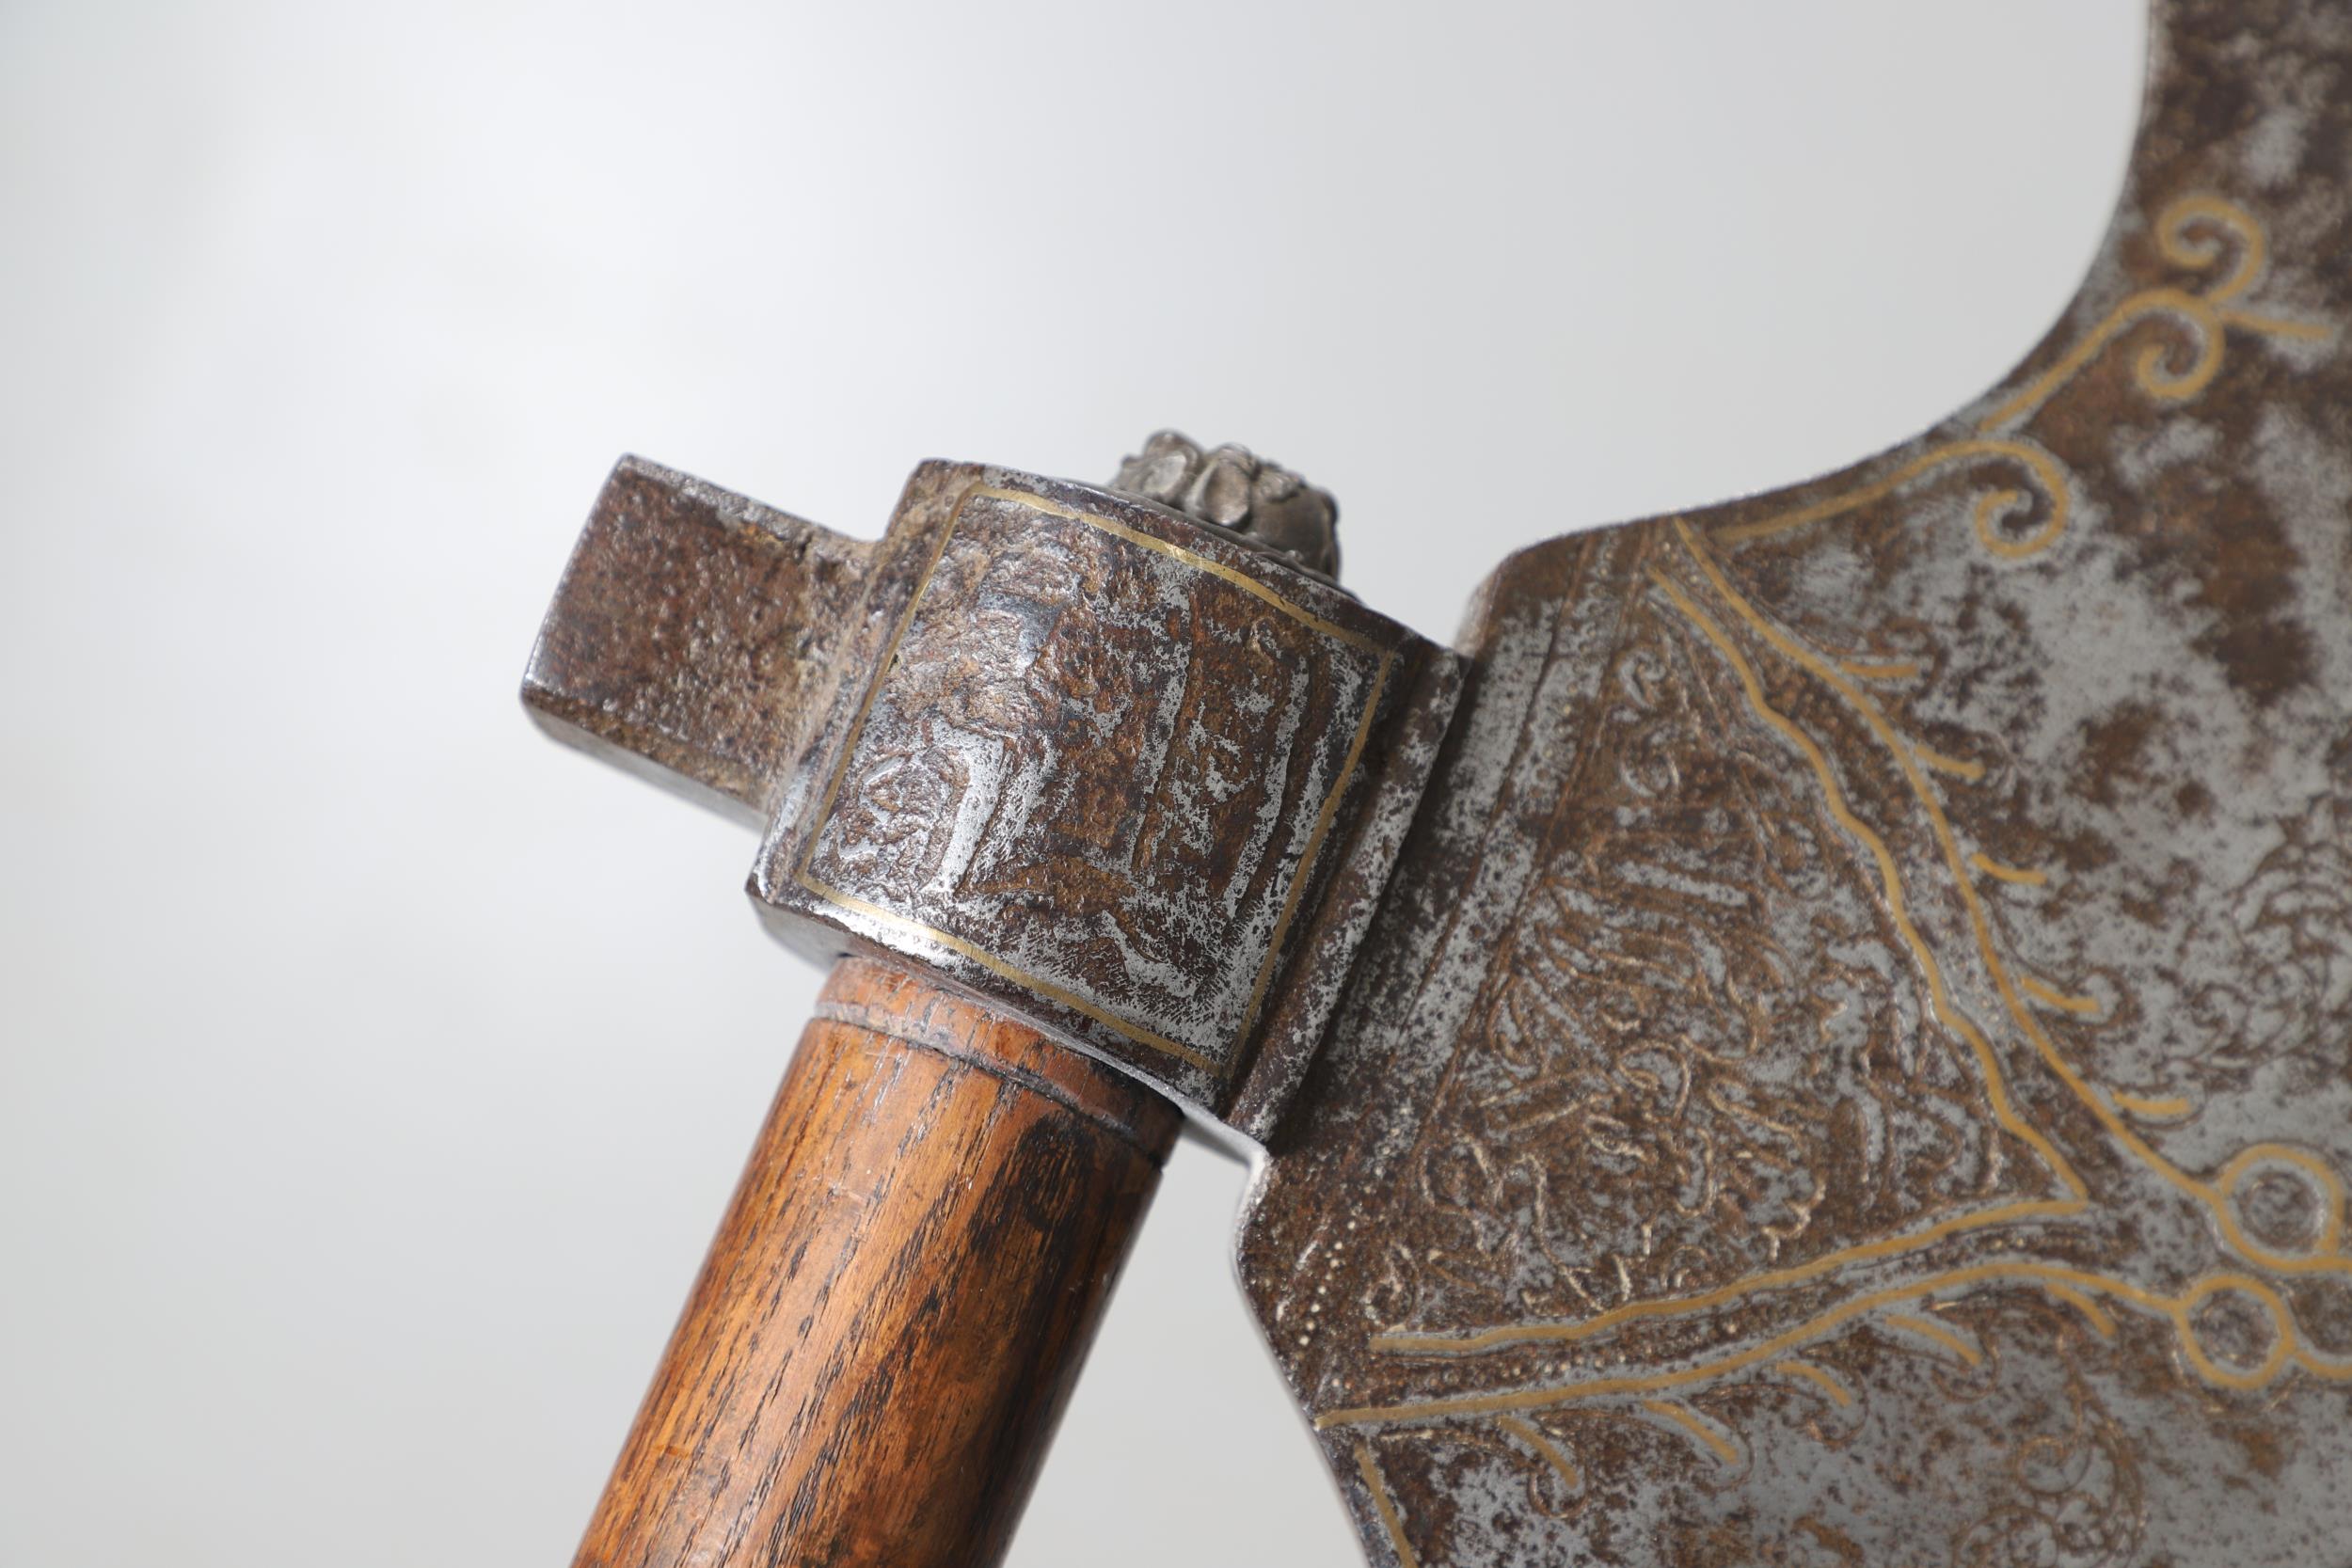 A SUBSTANTIAL PERSIAN OR OTTOMAN TWO HANDLED AXE. - Image 10 of 11